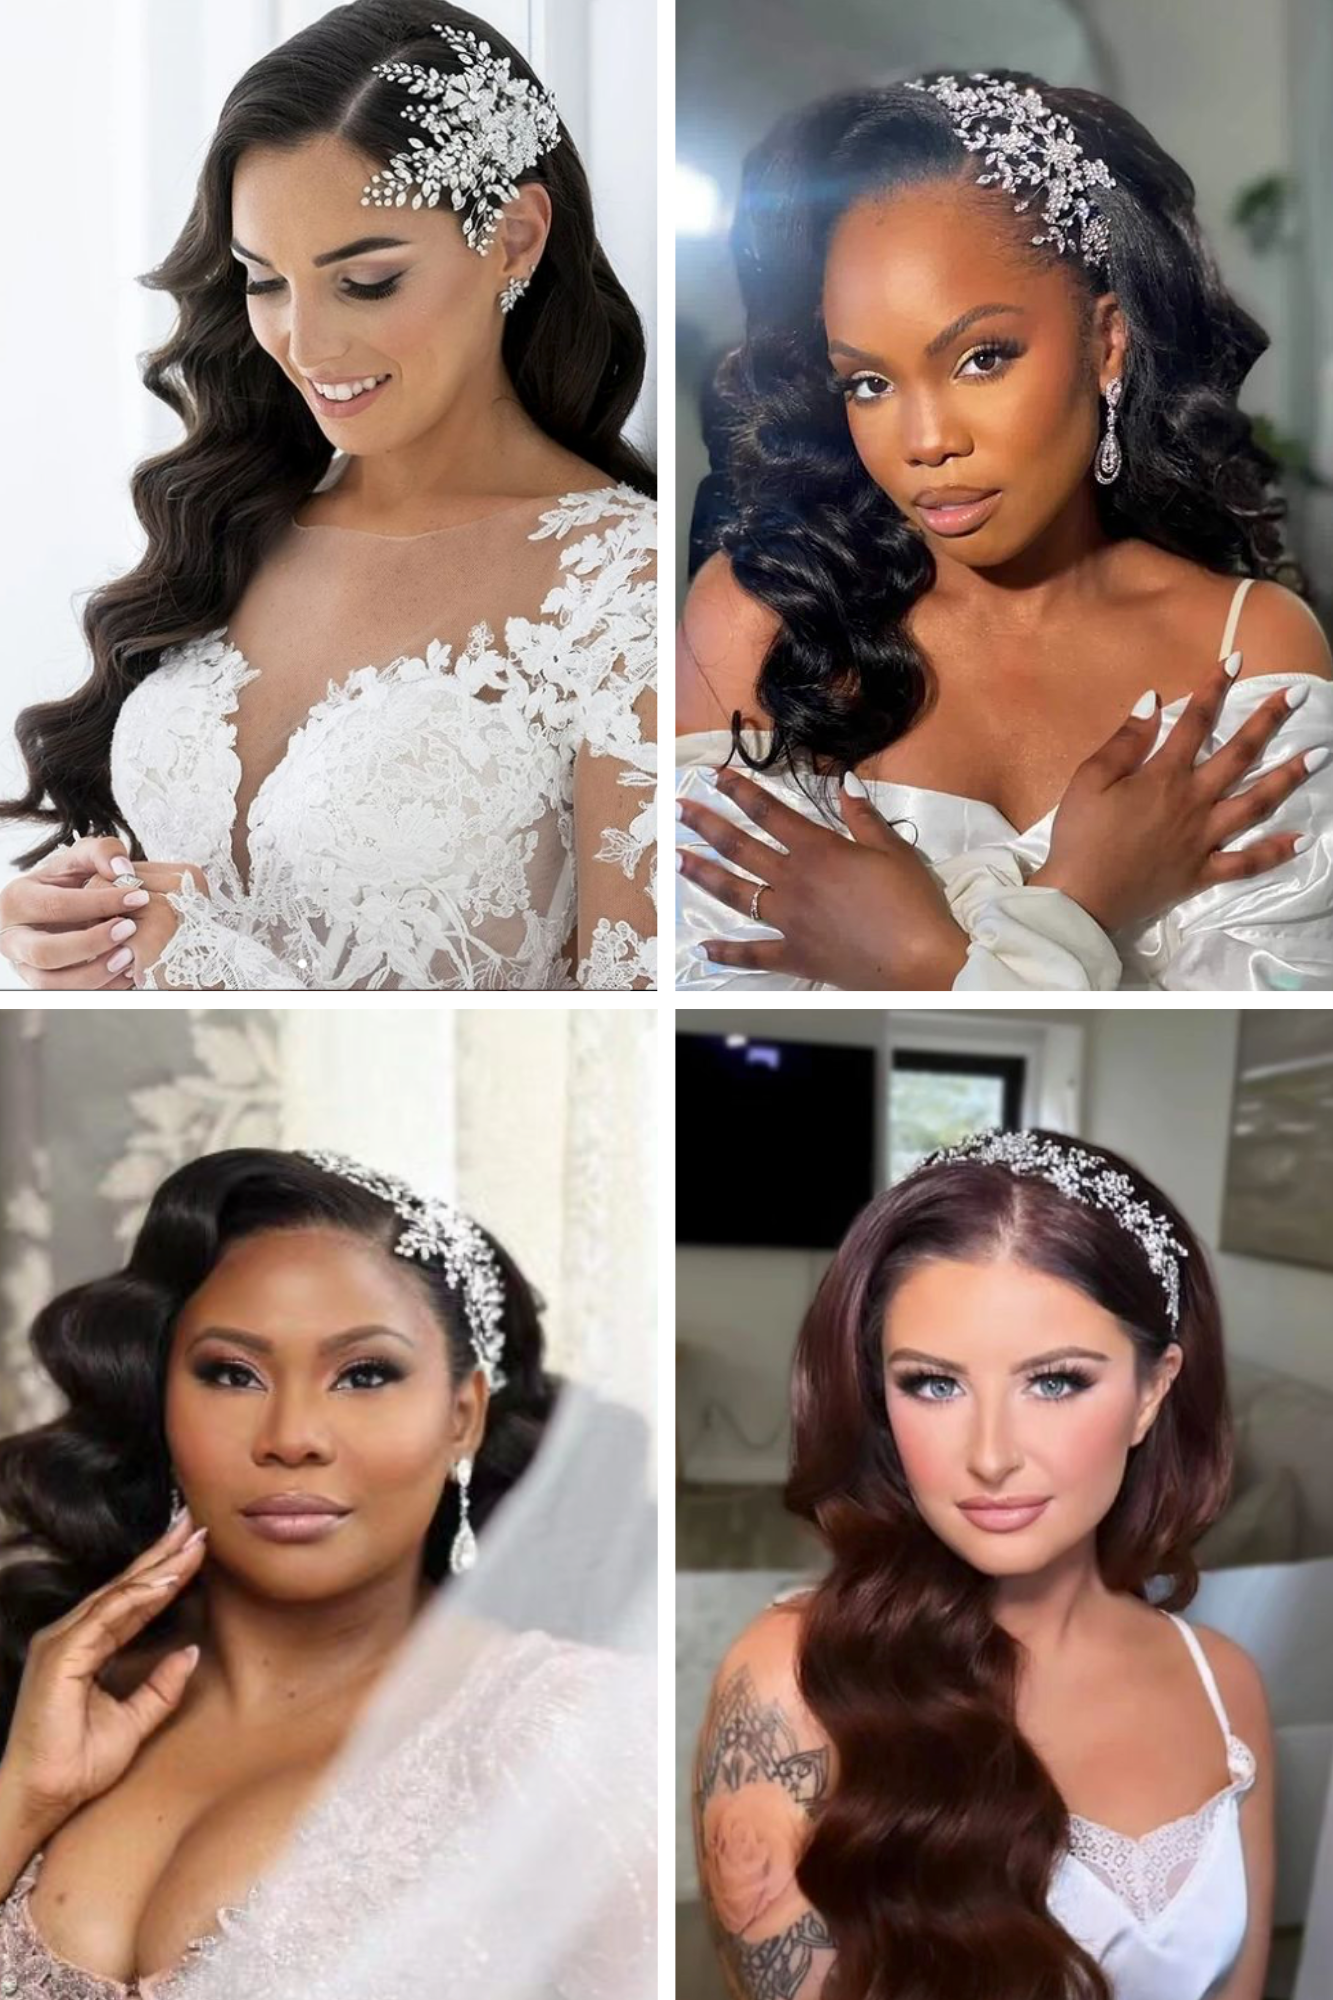 4 images in a collage showing different brides wearing their long hair in Hollywood waves with accessories